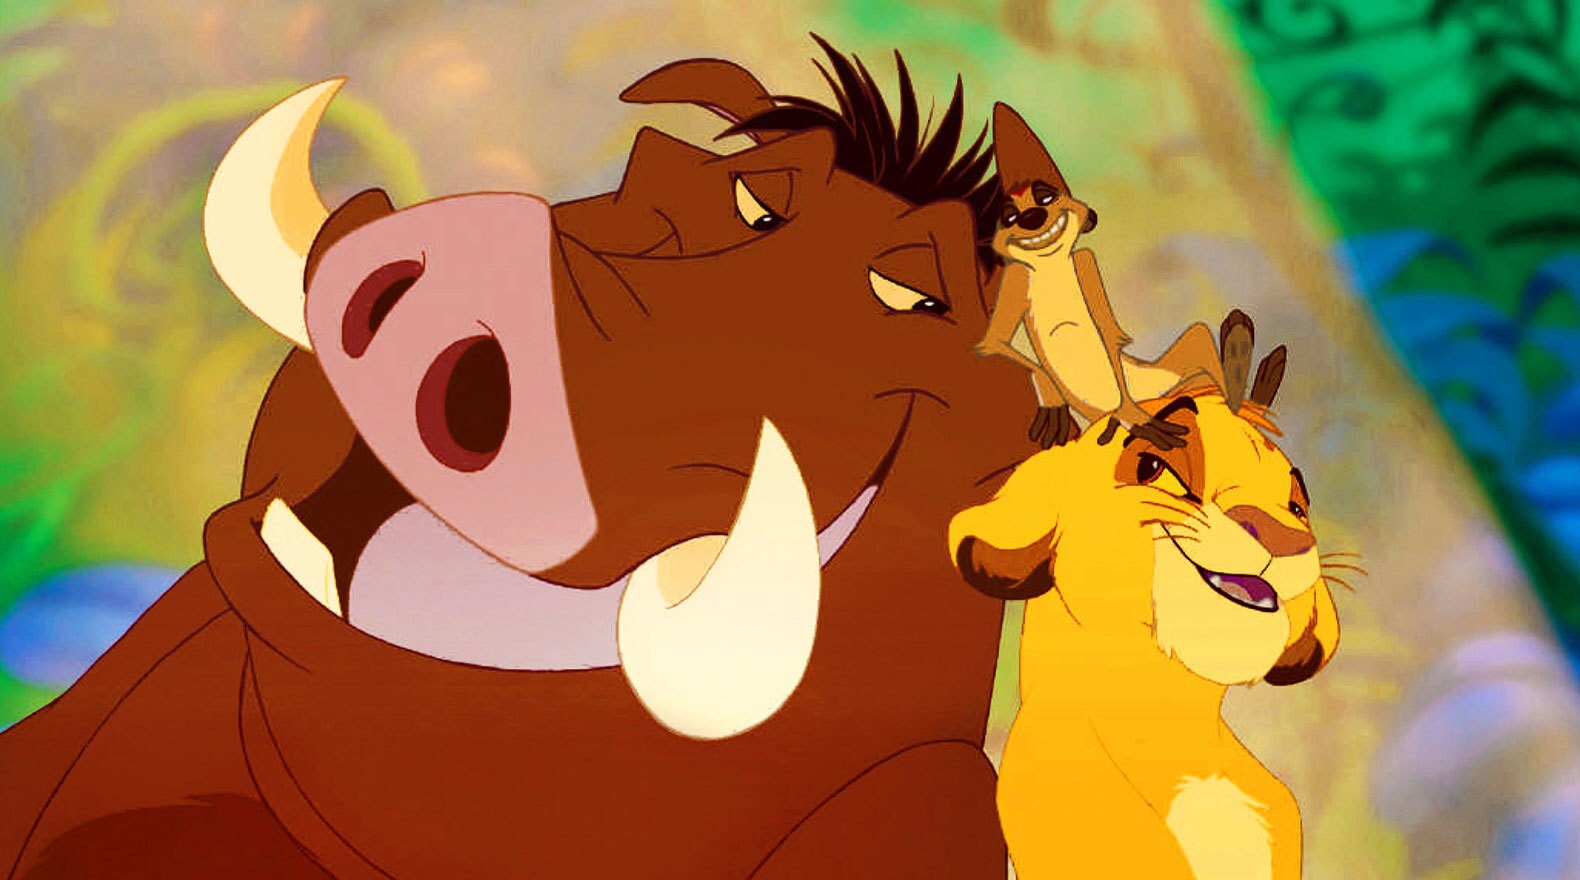 Timon and Pumbaa teach Simba about how to live life by their motto.